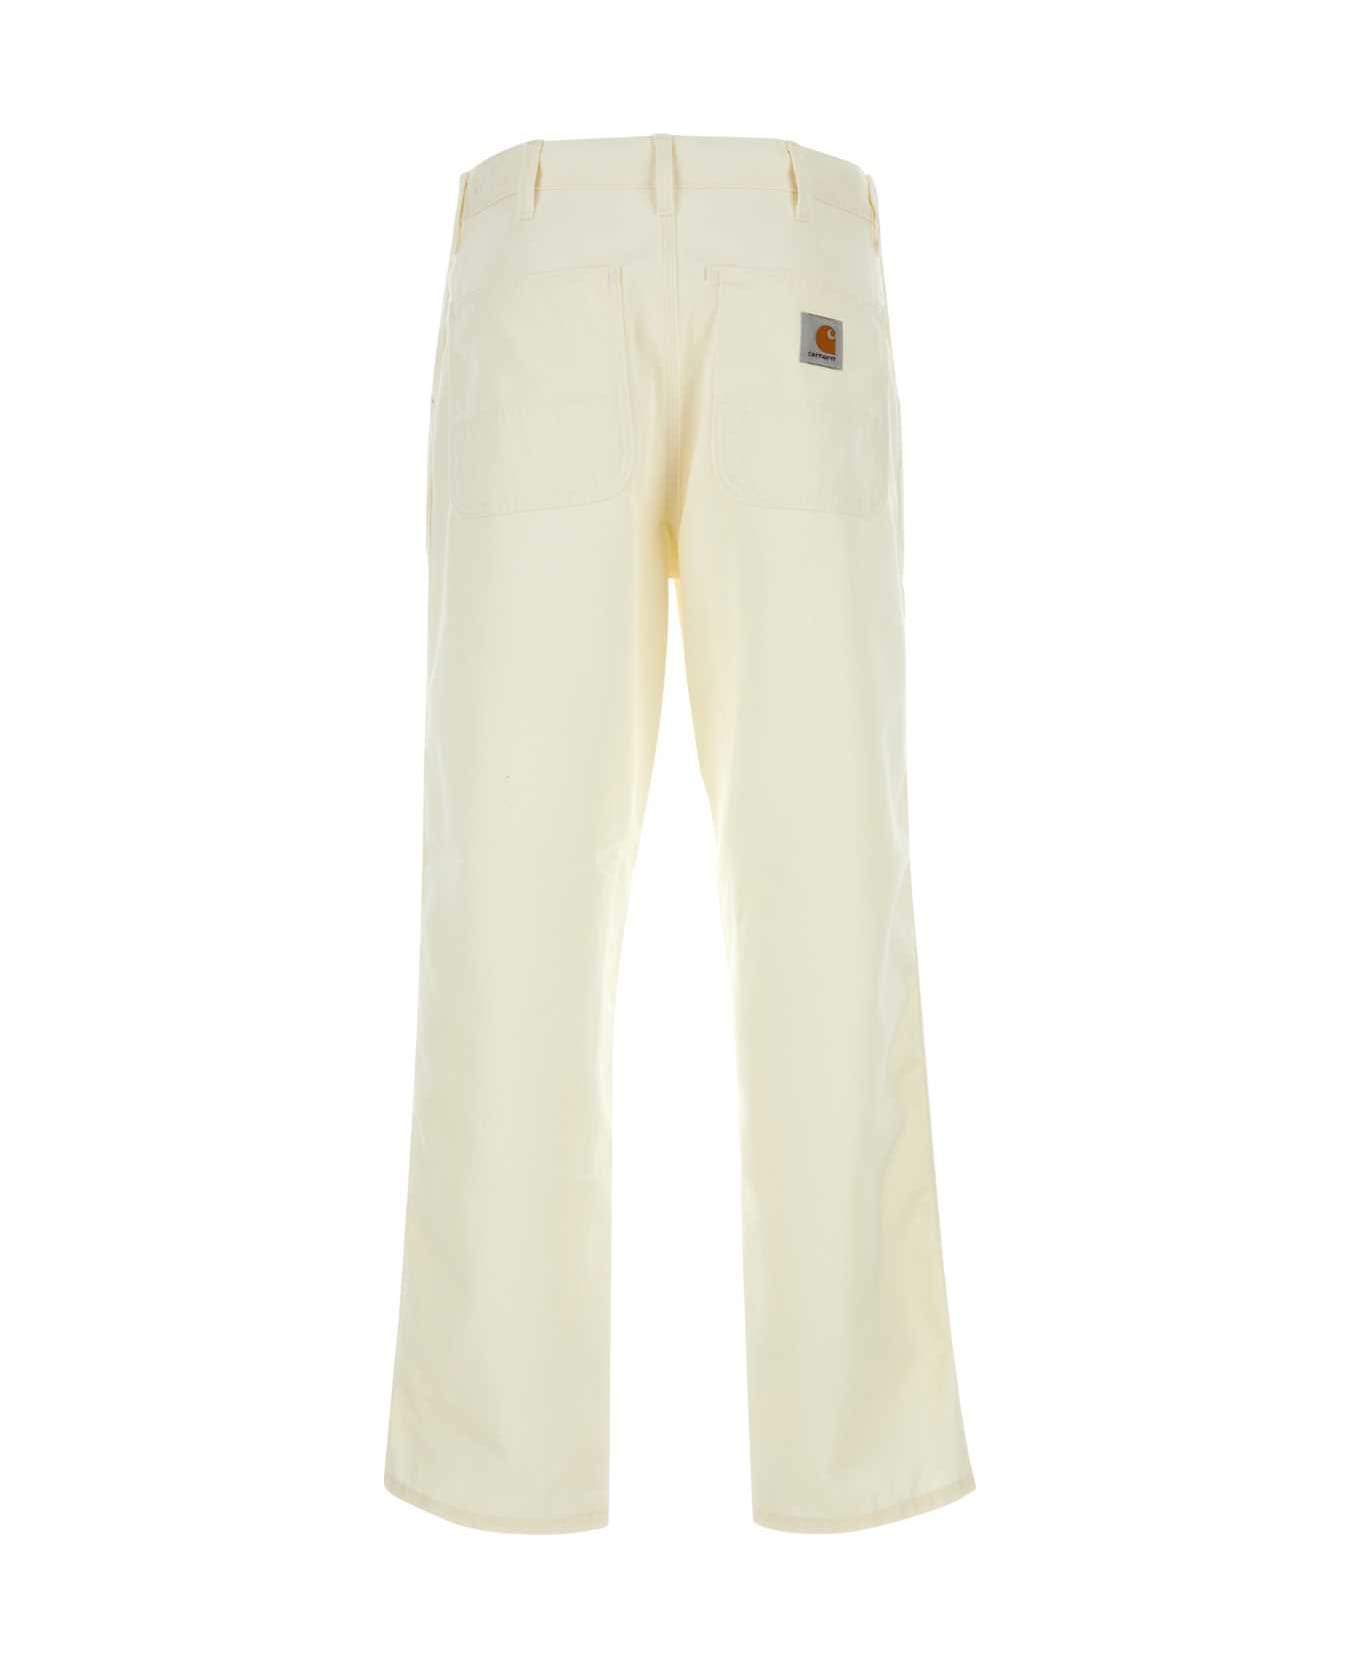 Carhartt Ivory Polyester Blend Simple Pant - WAX